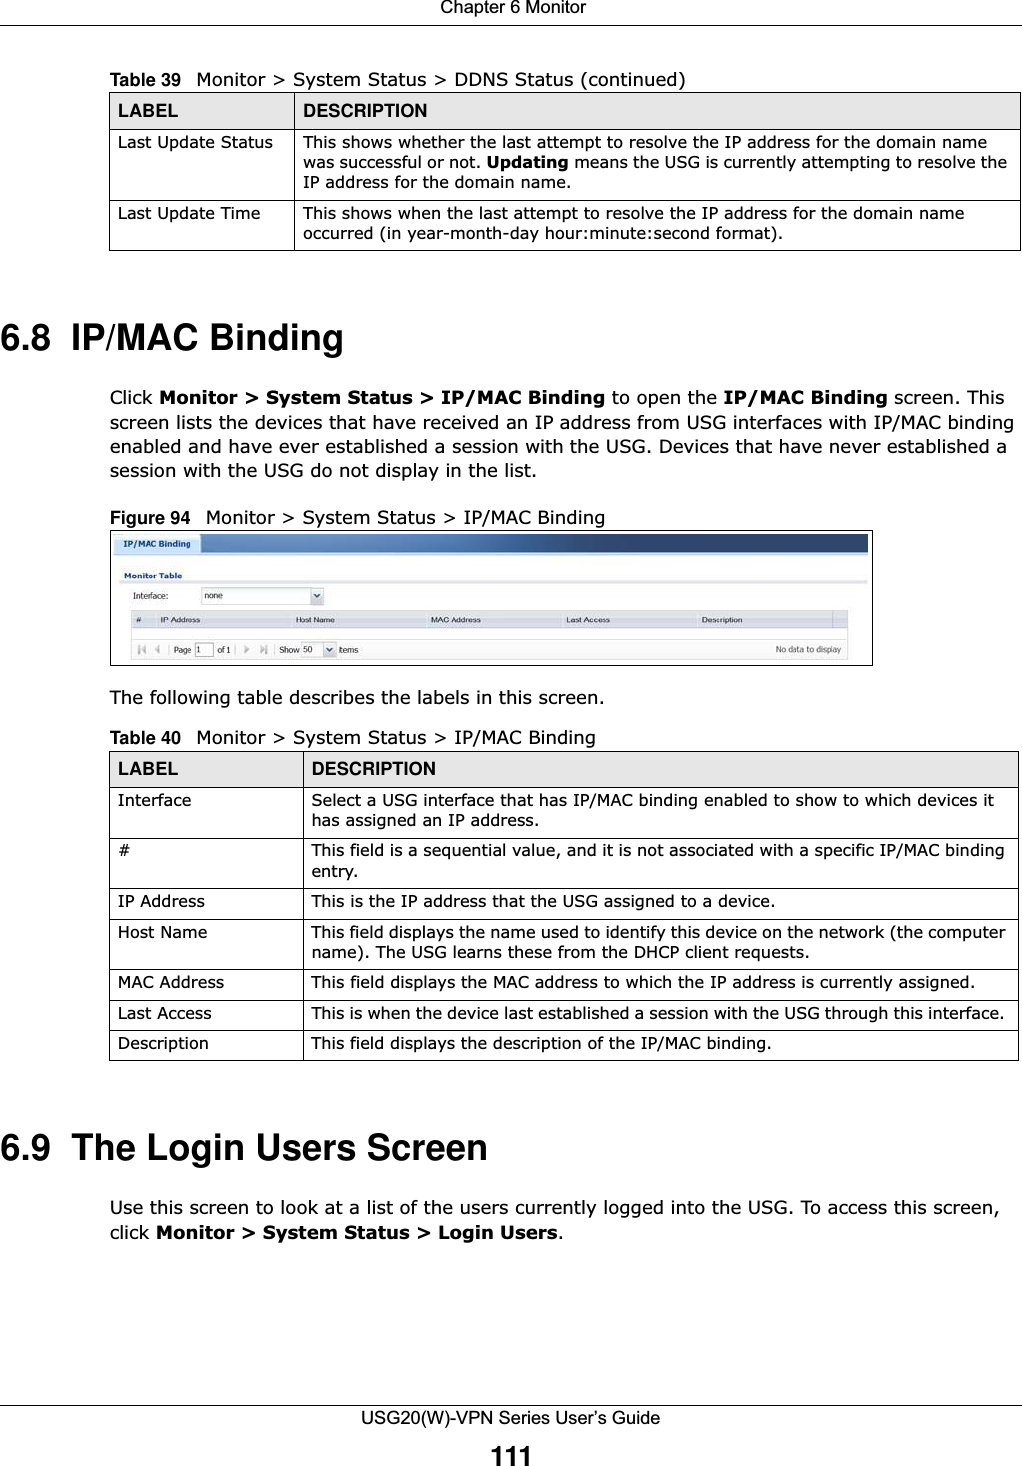  Chapter 6 MonitorUSG20(W)-VPN Series User’s Guide1116.8  IP/MAC BindingClick Monitor &gt; System Status &gt; IP/MAC Binding to open the IP/MAC Binding screen. This screen lists the devices that have received an IP address from USG interfaces with IP/MAC binding enabled and have ever established a session with the USG. Devices that have never established a session with the USG do not display in the list.Figure 94   Monitor &gt; System Status &gt; IP/MAC Binding    The following table describes the labels in this screen.  6.9  The Login Users Screen Use this screen to look at a list of the users currently logged into the USG. To access this screen, click Monitor &gt; System Status &gt; Login Users.Last Update Status This shows whether the last attempt to resolve the IP address for the domain name was successful or not. Updating means the USG is currently attempting to resolve the IP address for the domain name.Last Update Time This shows when the last attempt to resolve the IP address for the domain name occurred (in year-month-day hour:minute:second format). Table 39   Monitor &gt; System Status &gt; DDNS Status (continued)LABEL DESCRIPTIONTable 40   Monitor &gt; System Status &gt; IP/MAC Binding LABEL DESCRIPTIONInterface Select a USG interface that has IP/MAC binding enabled to show to which devices it has assigned an IP address.#This field is a sequential value, and it is not associated with a specific IP/MAC binding entry.IP Address This is the IP address that the USG assigned to a device.Host Name This field displays the name used to identify this device on the network (the computer name). The USG learns these from the DHCP client requests.MAC Address This field displays the MAC address to which the IP address is currently assigned.Last Access This is when the device last established a session with the USG through this interface. Description This field displays the description of the IP/MAC binding.